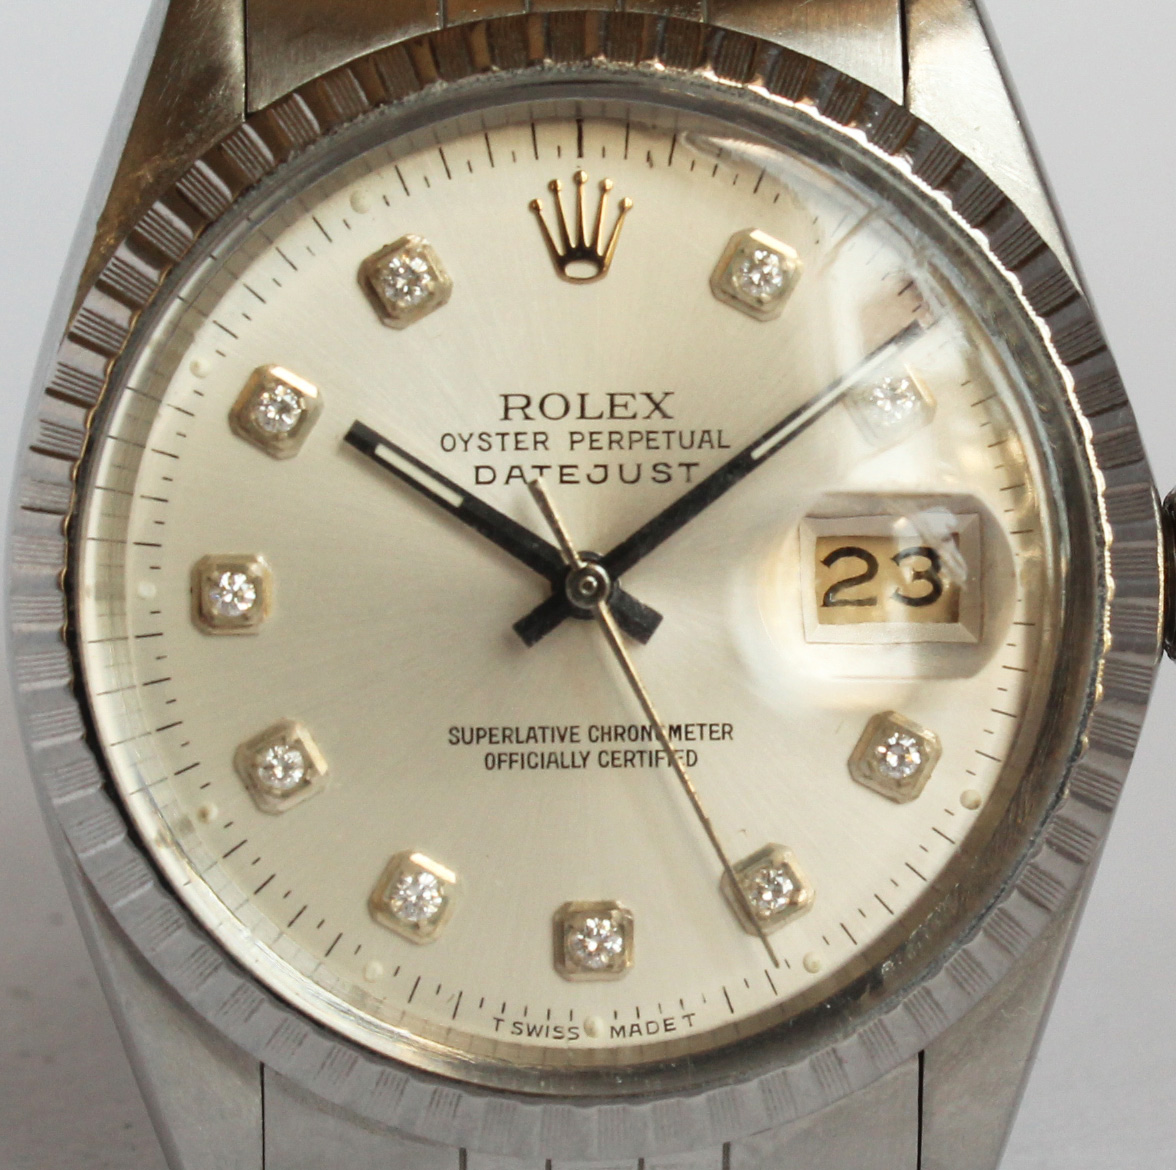 ROLEX Oyster Perpetual DATEJUST. - Image 2 of 10